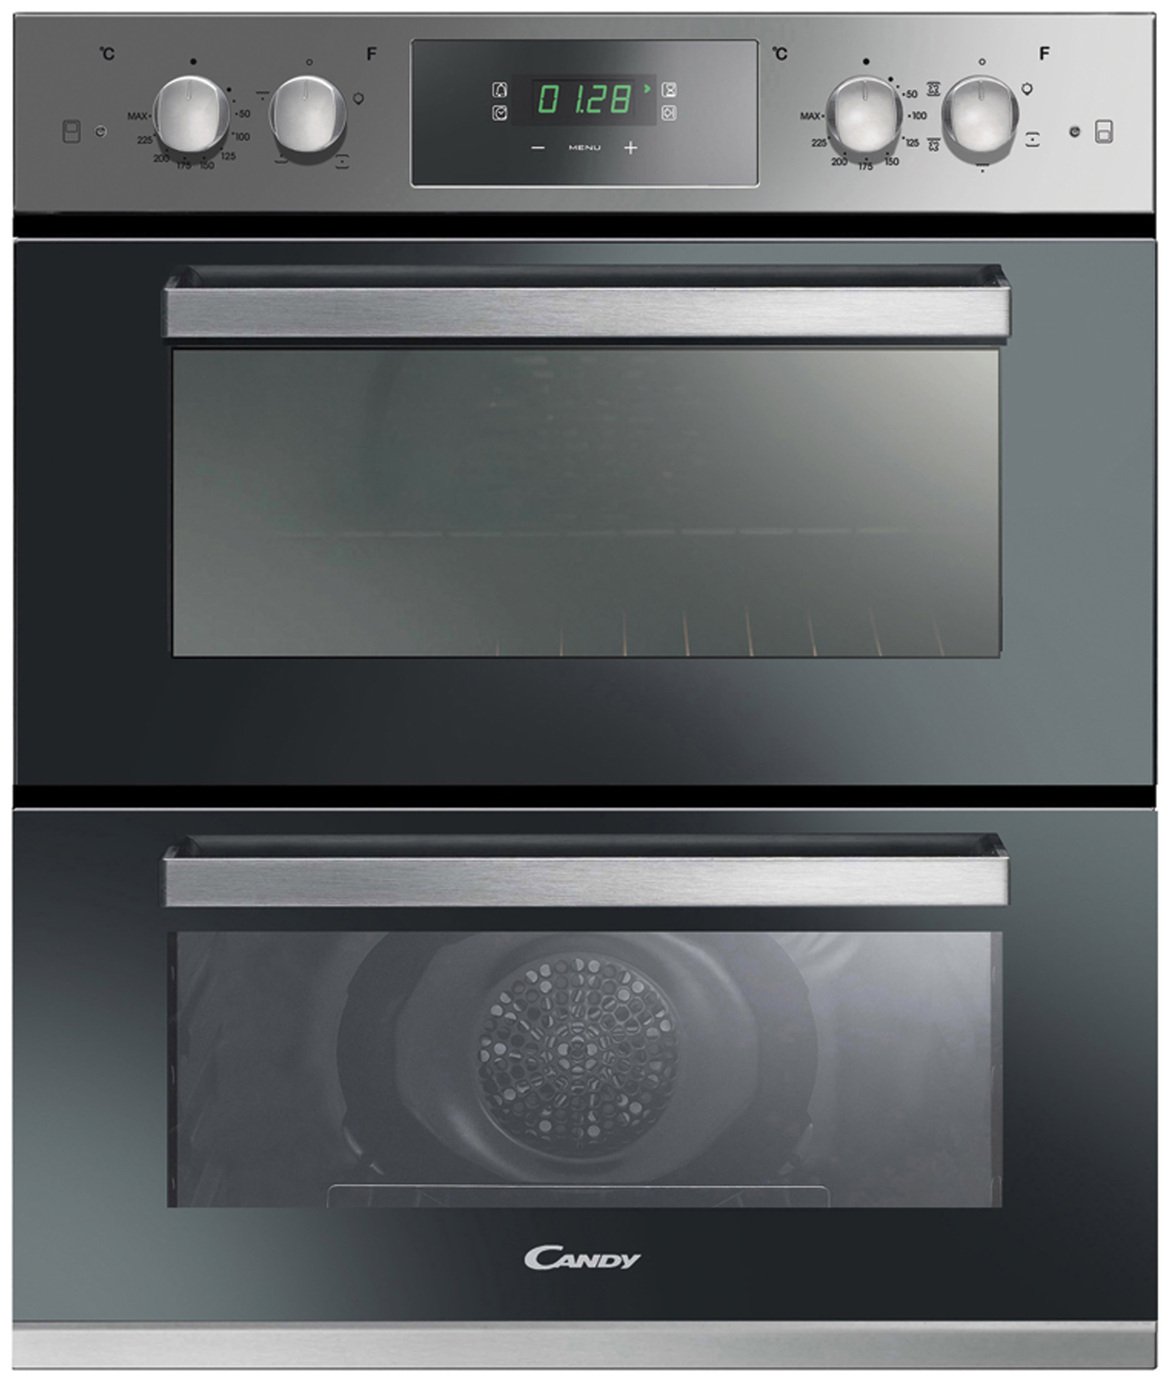 Candy FC7D415X Built Under Electric Double Oven